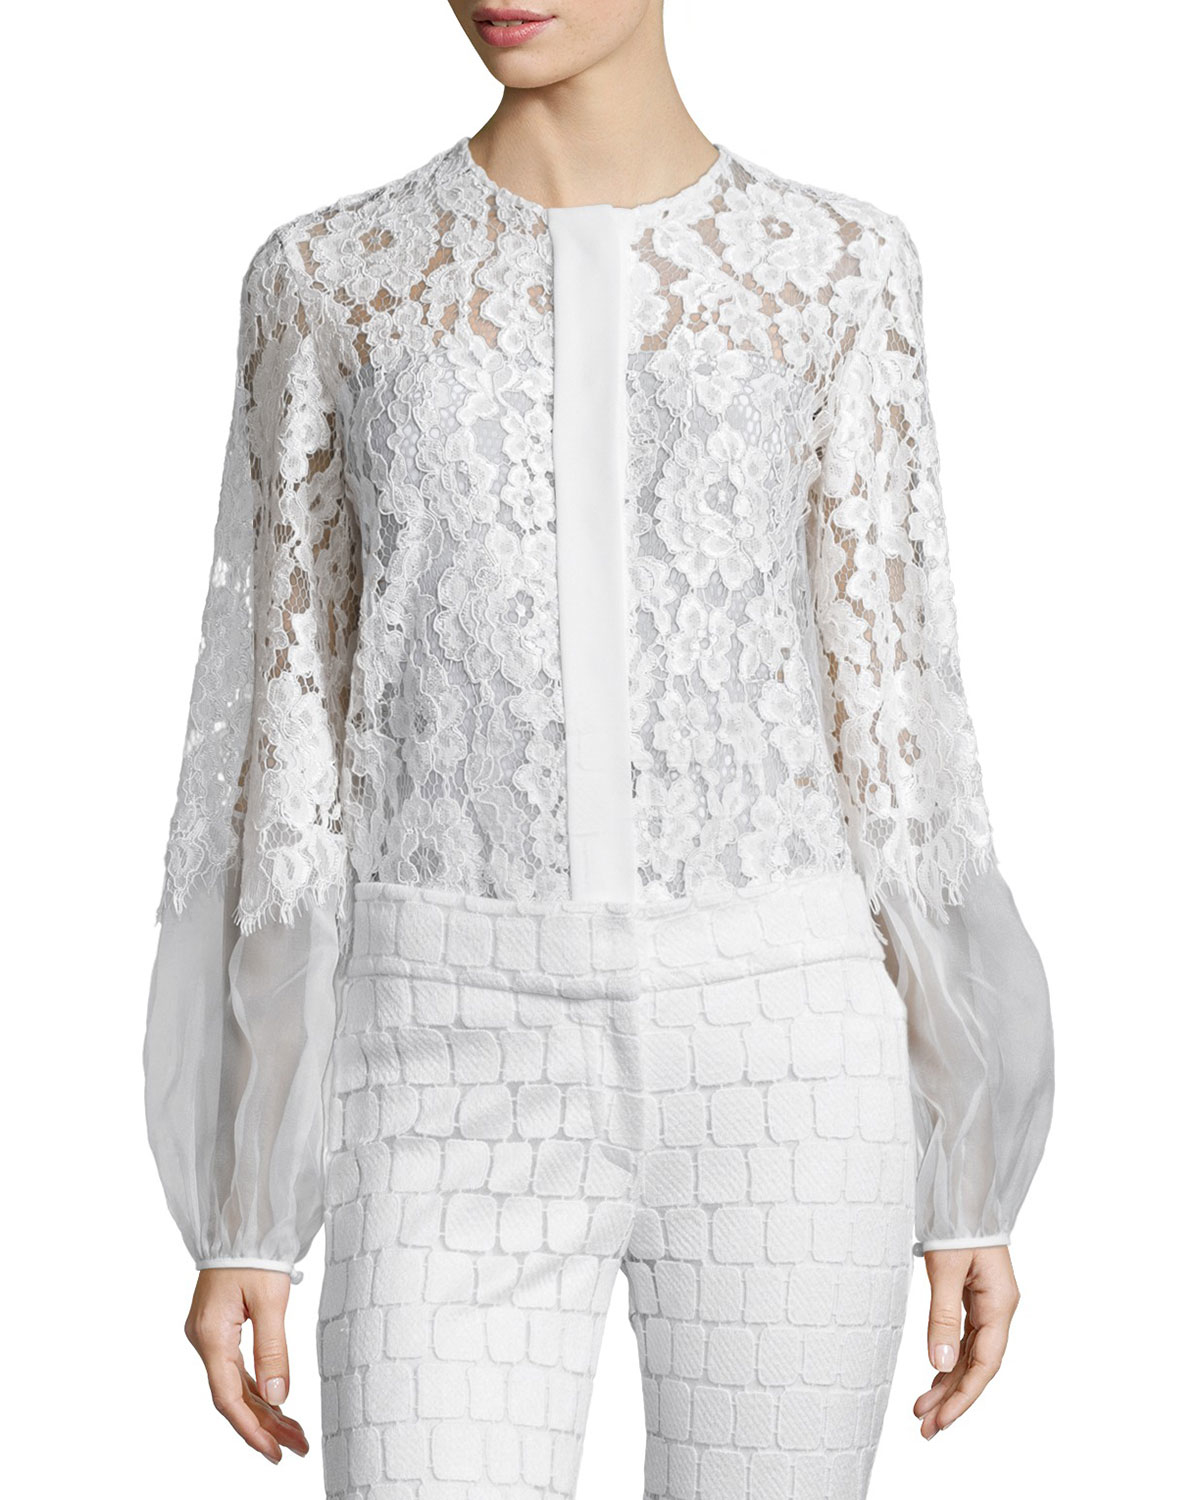 Lyst - Alexis Sue Long-sleeve Lace Blouse in White